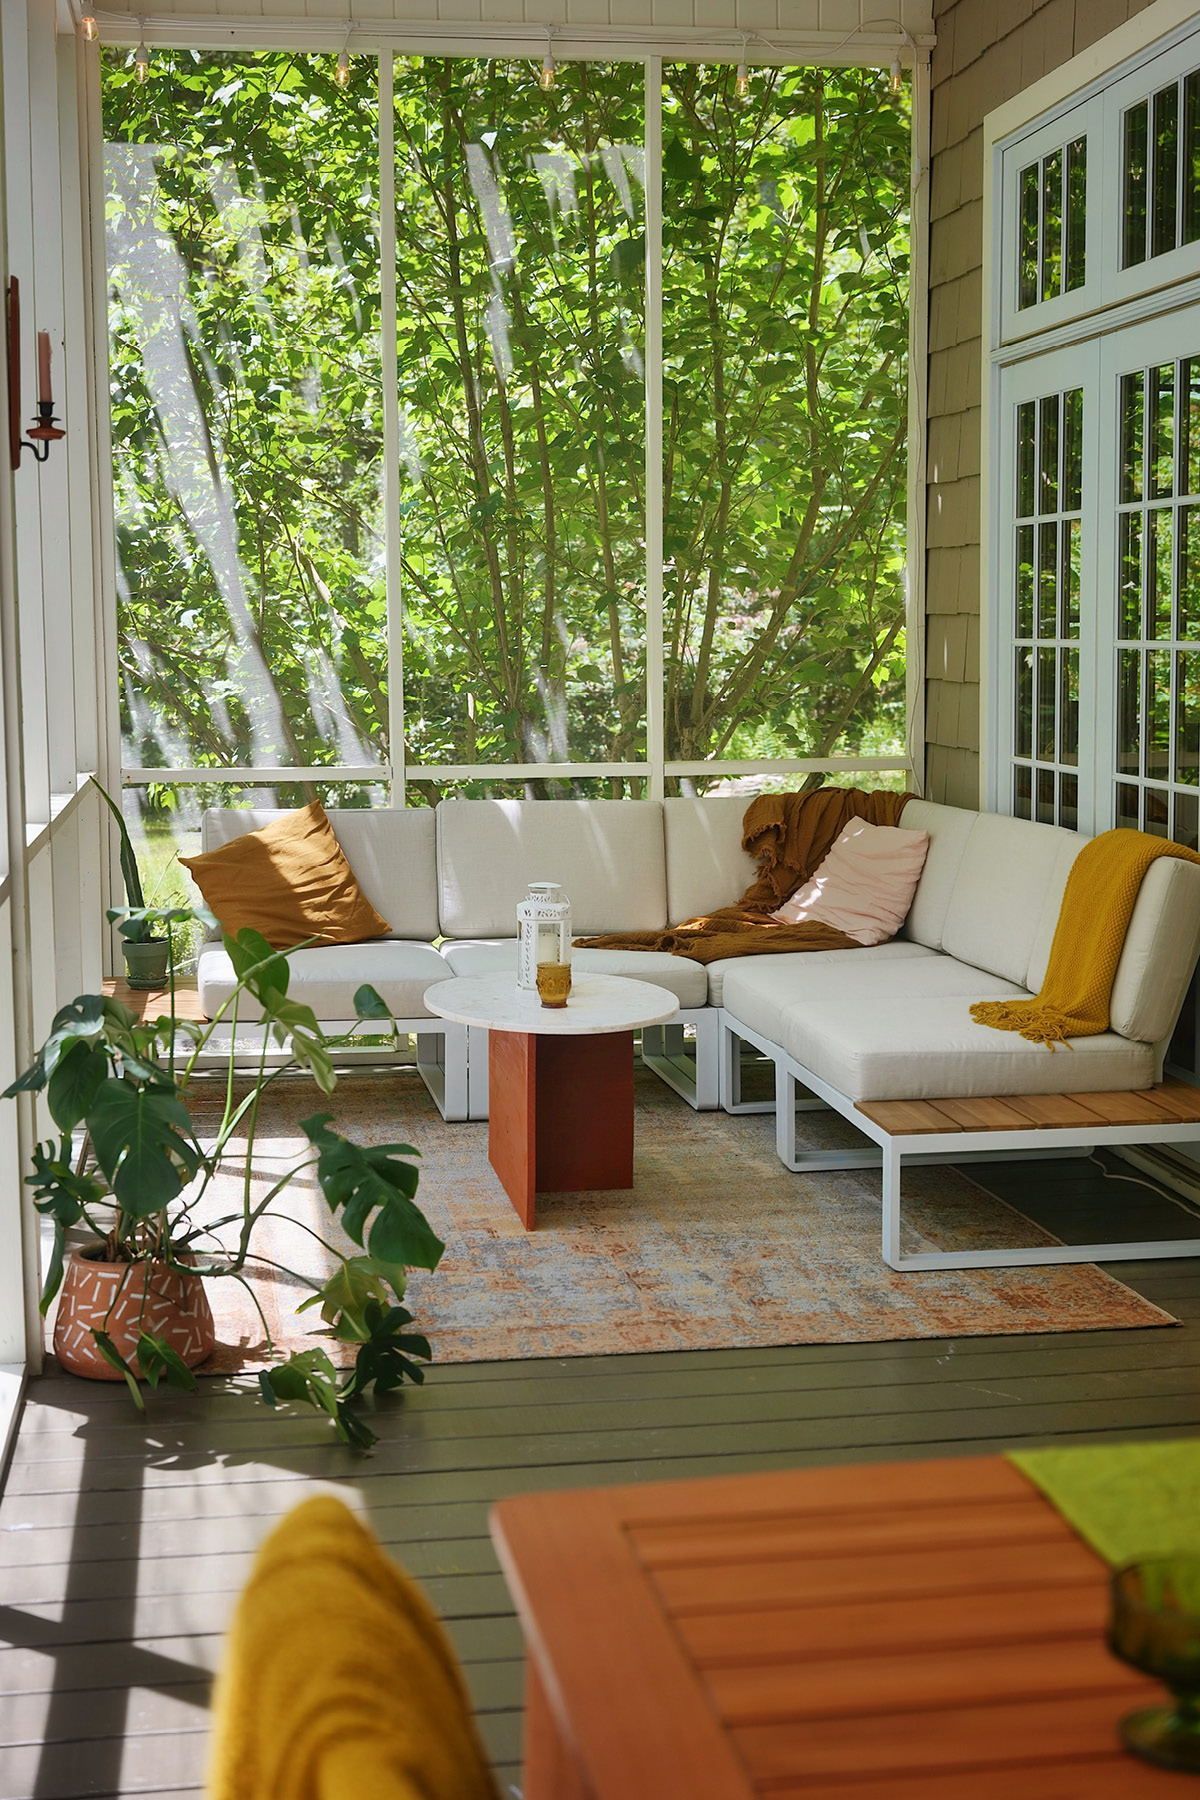 The Ultimate Seating Solution for Your Outdoor Space